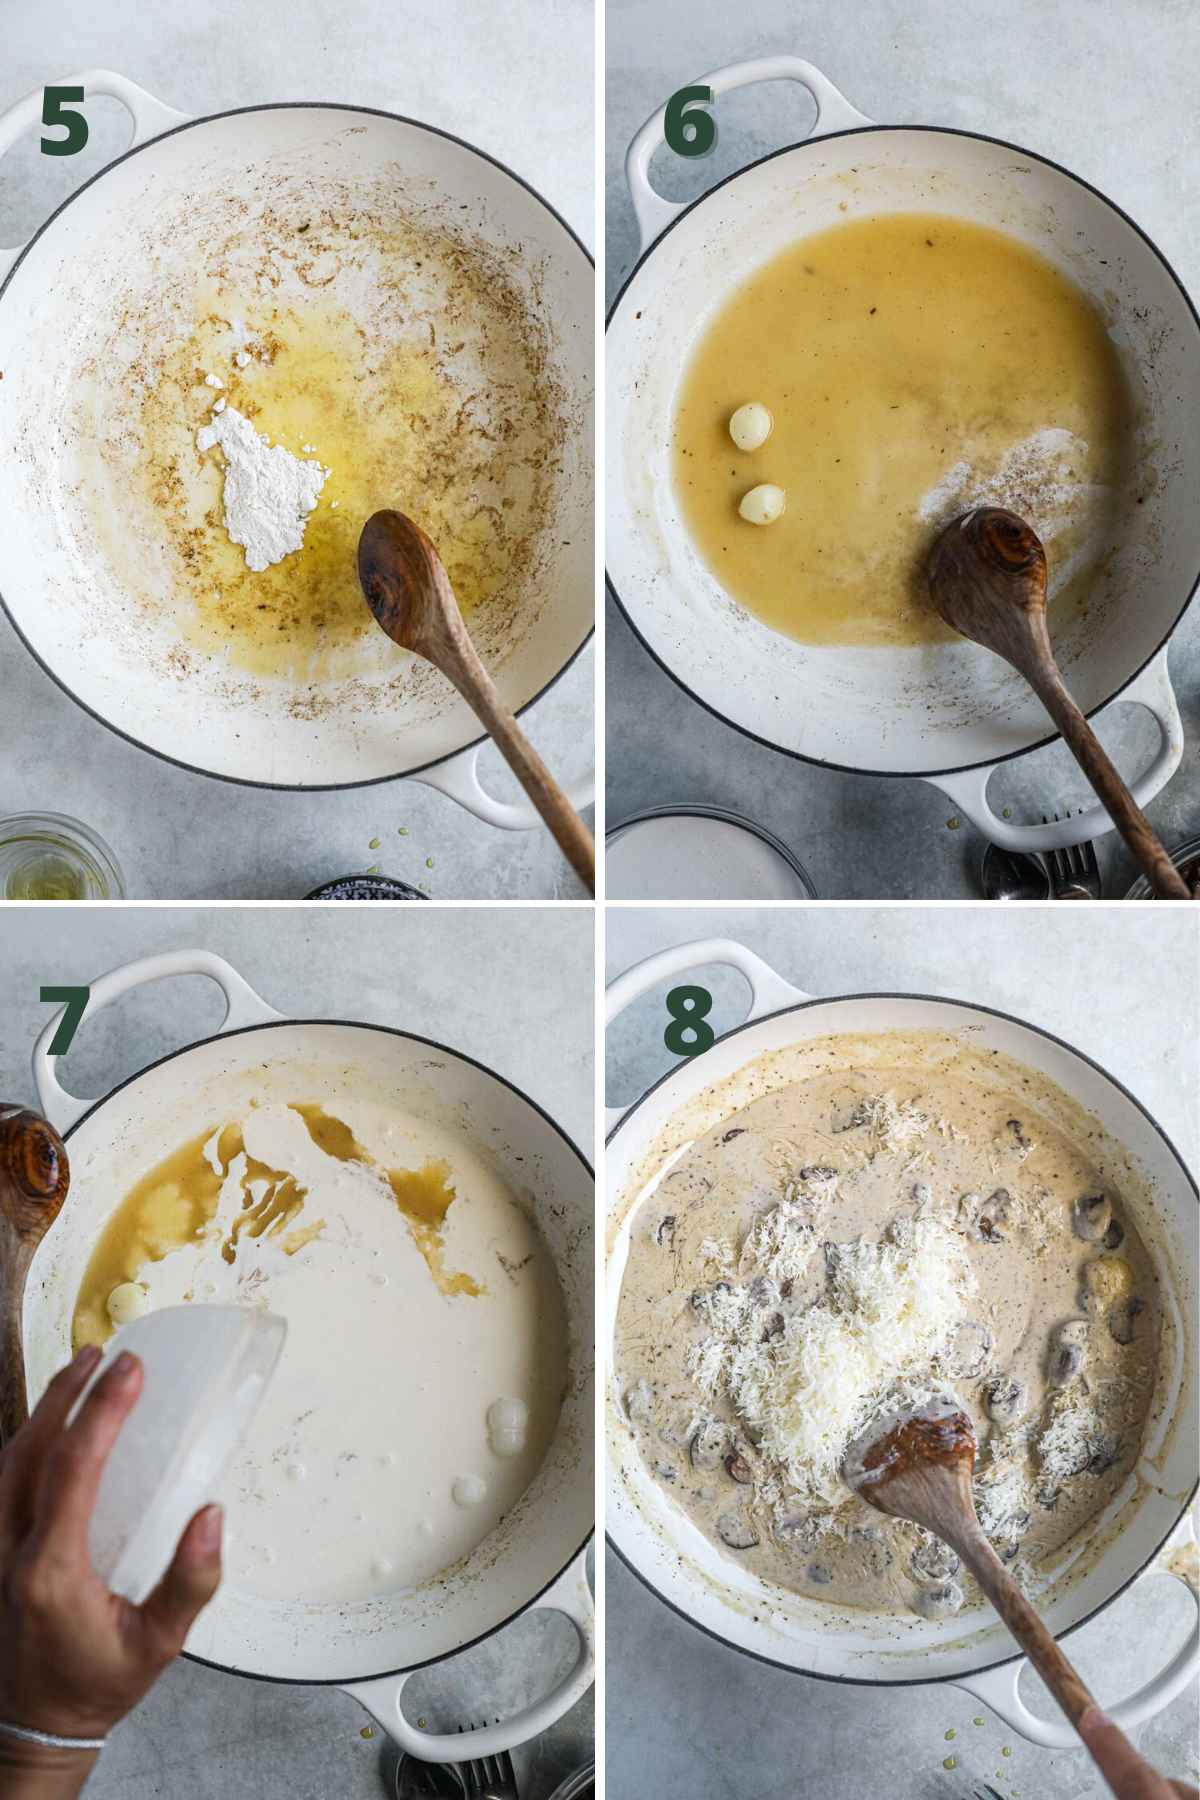 Steps to make black truffle mushroom pasta, melt butter, add flour, add wine and garlic and cook down, add heavy cream, stir in mushrooms and cheese.